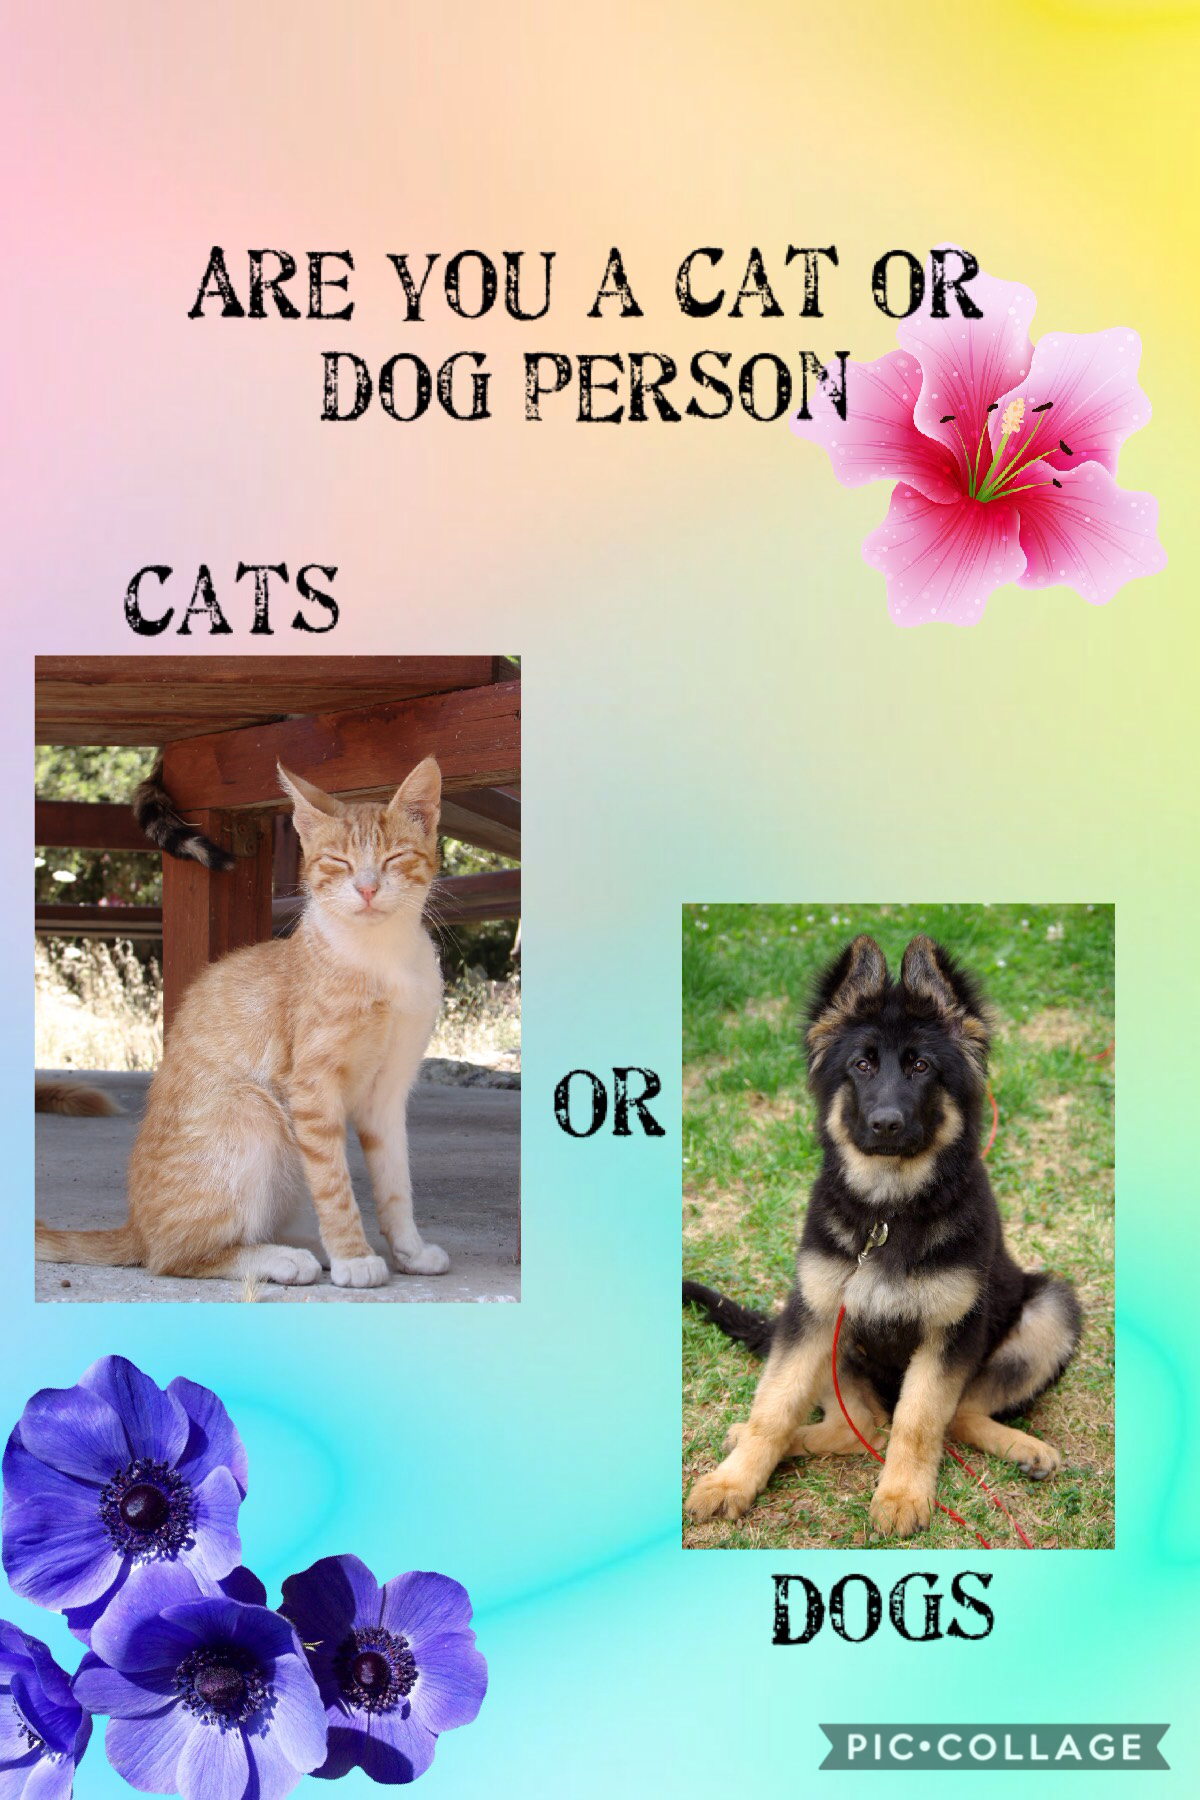 Comment why you are a cat person or a dog person 